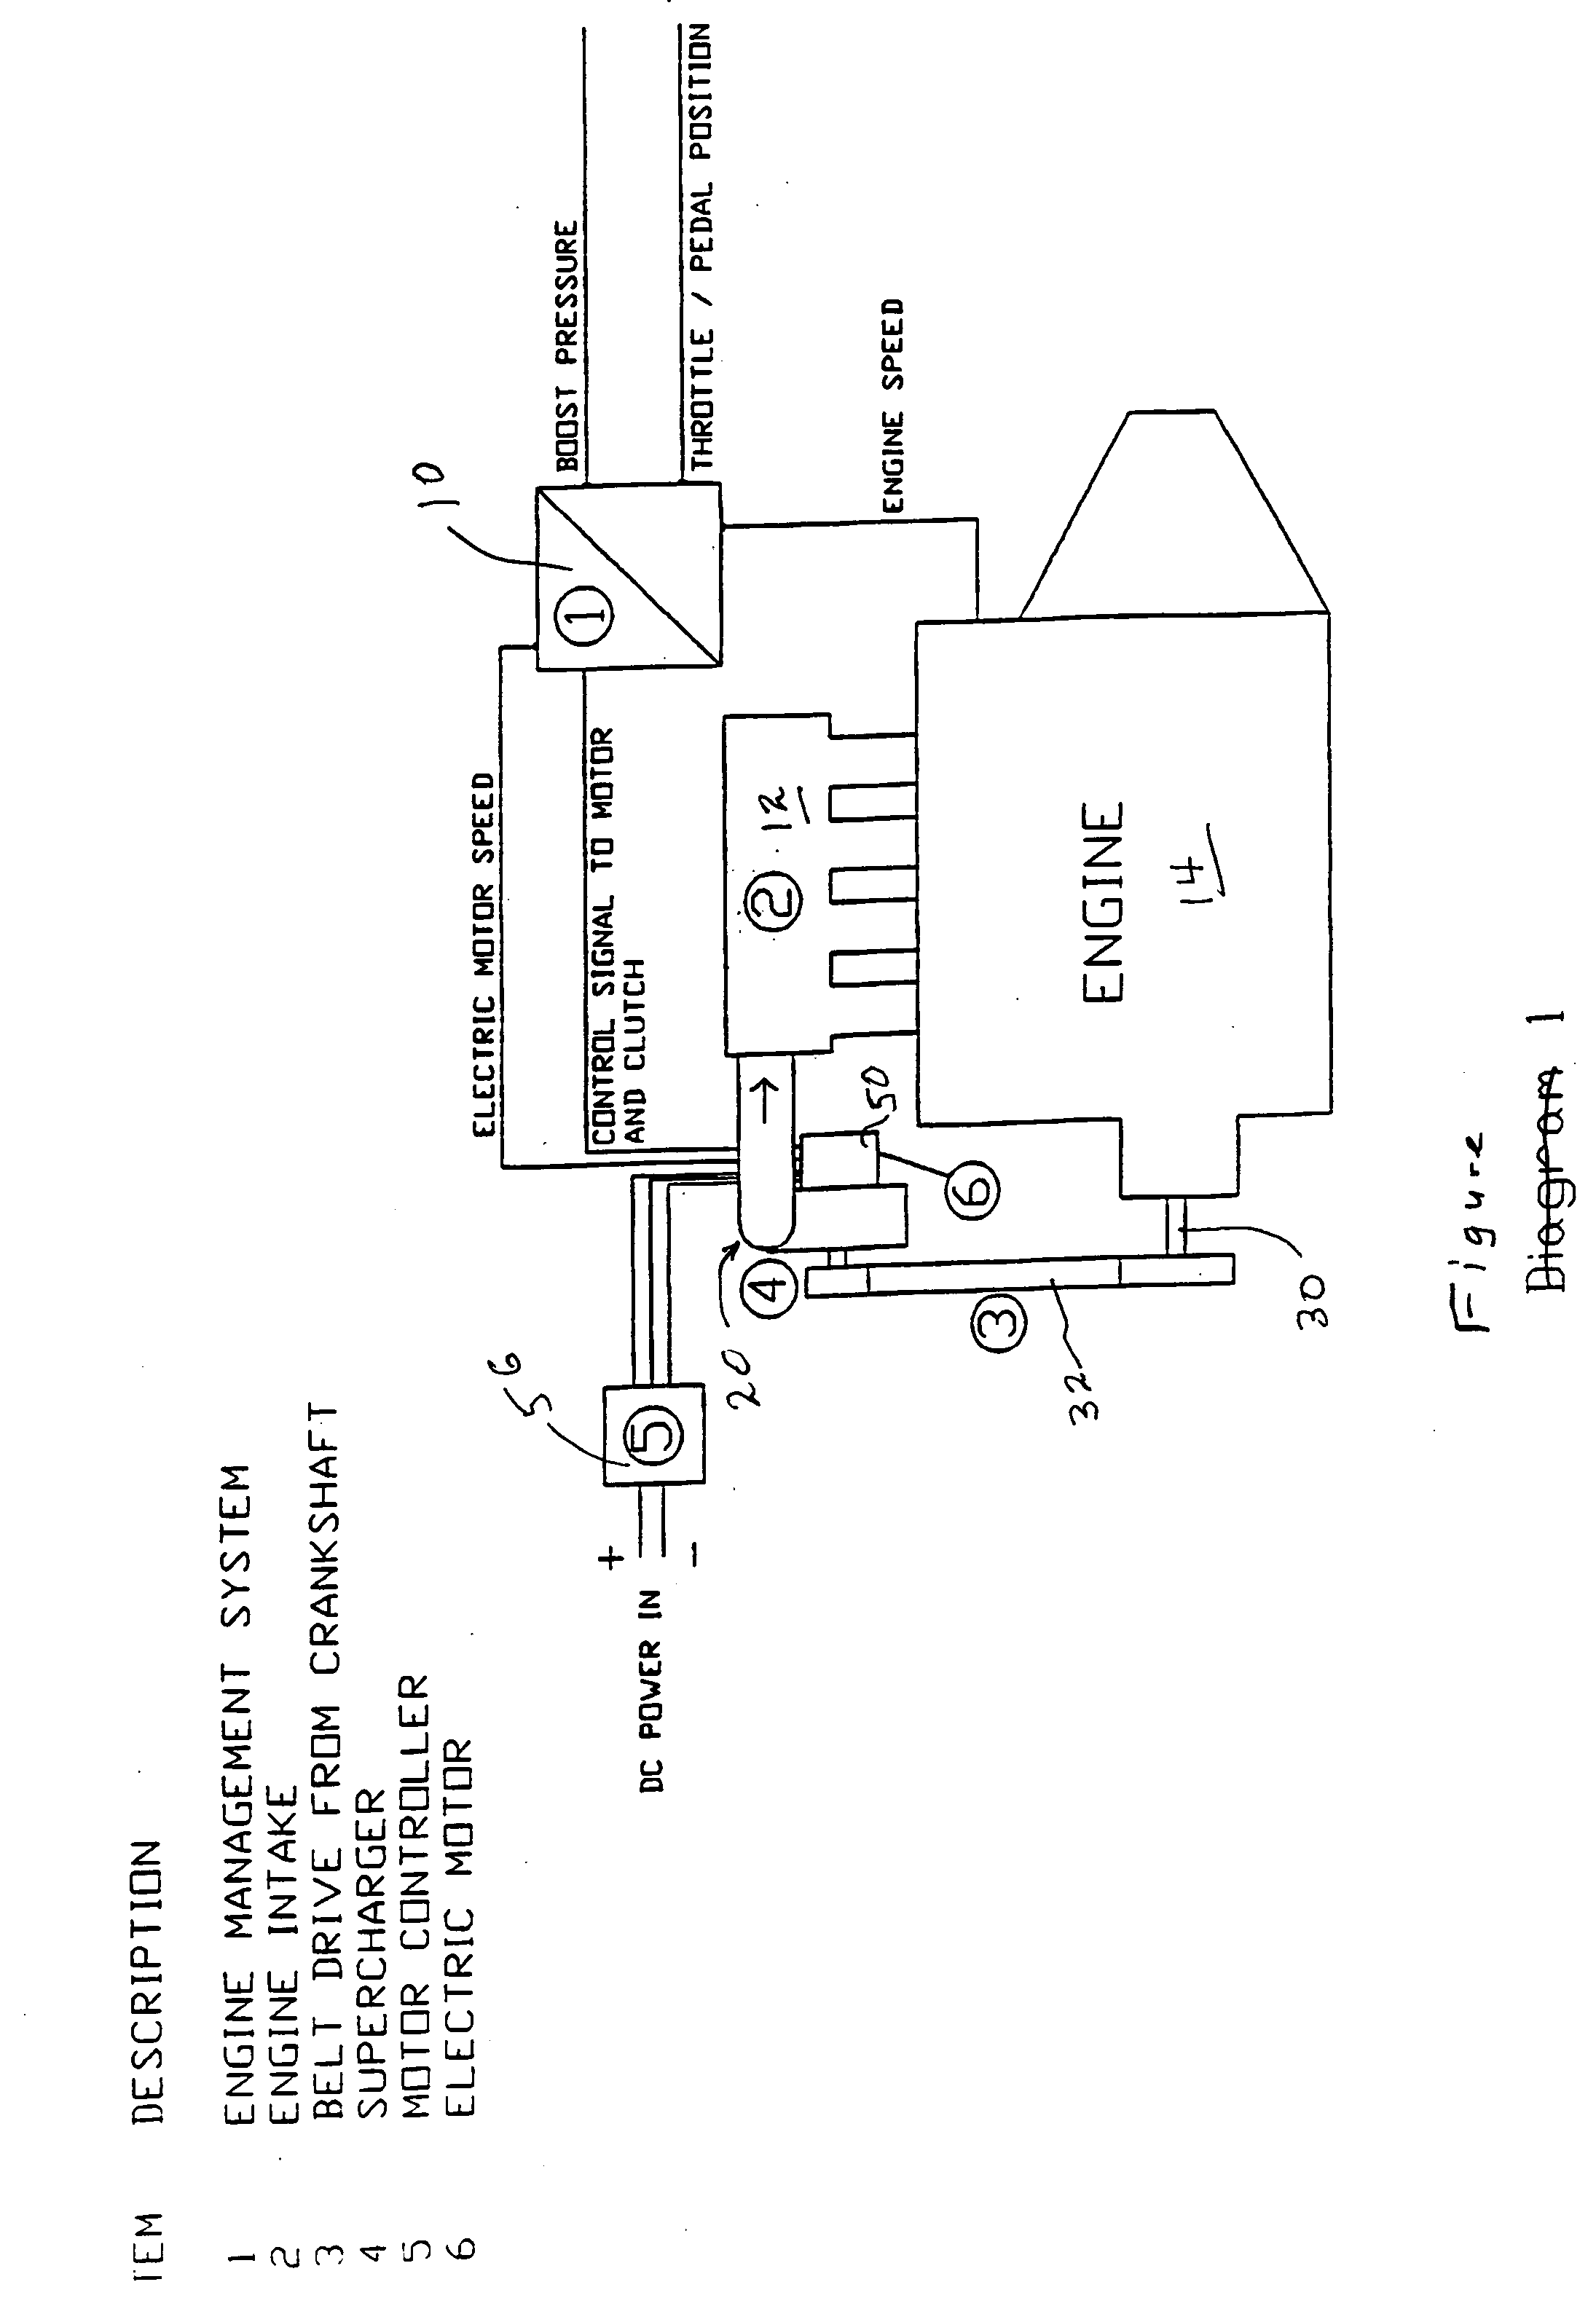 Motor assisted mechanical supercharging system